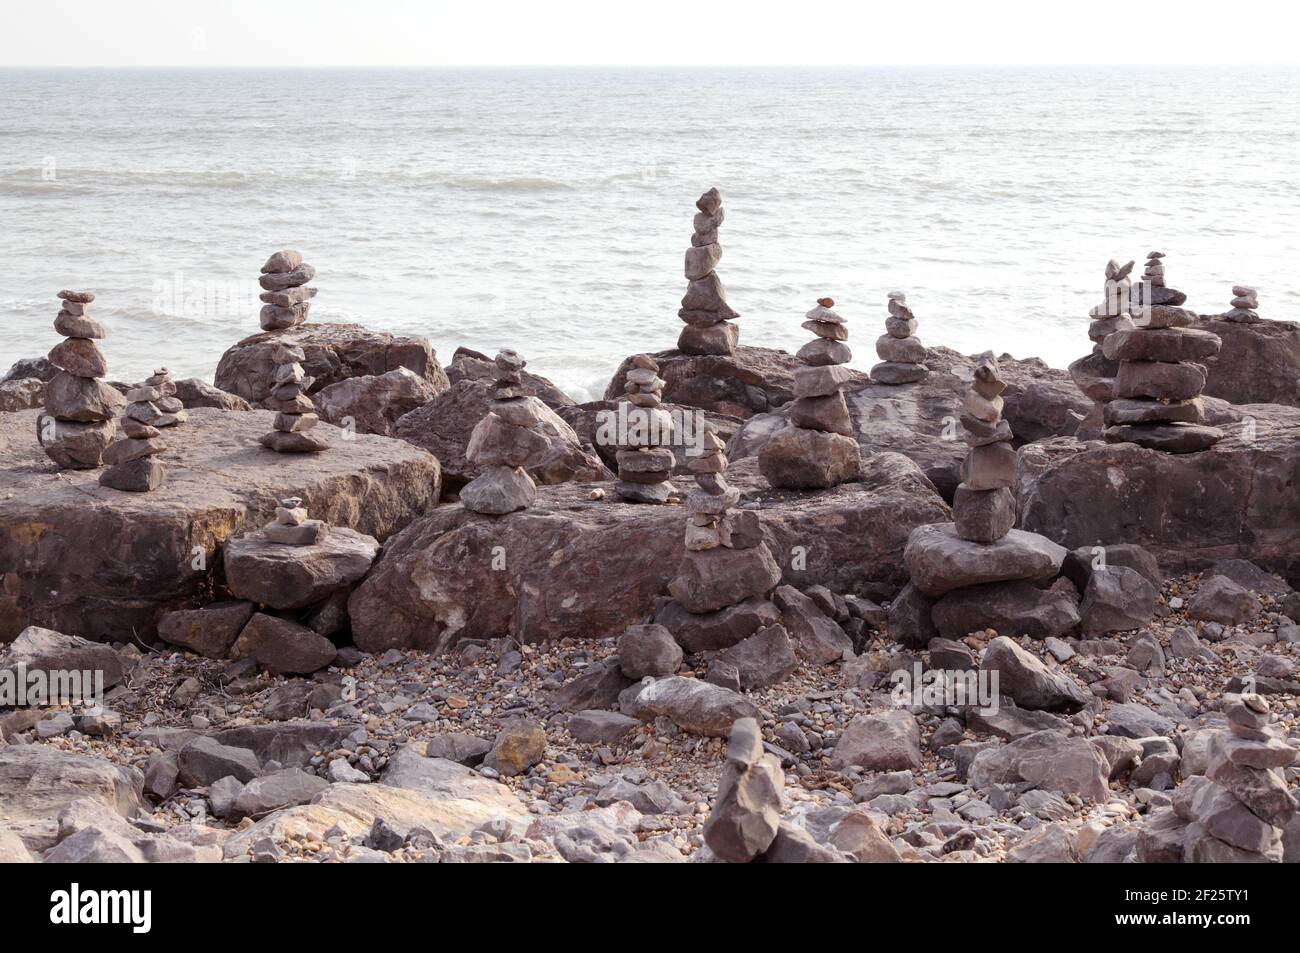 Stacks of balancing stones or balanced rocks to make rock or stone cairns. Stacked or piled on beach shoreline with sea behind. Stock Photo